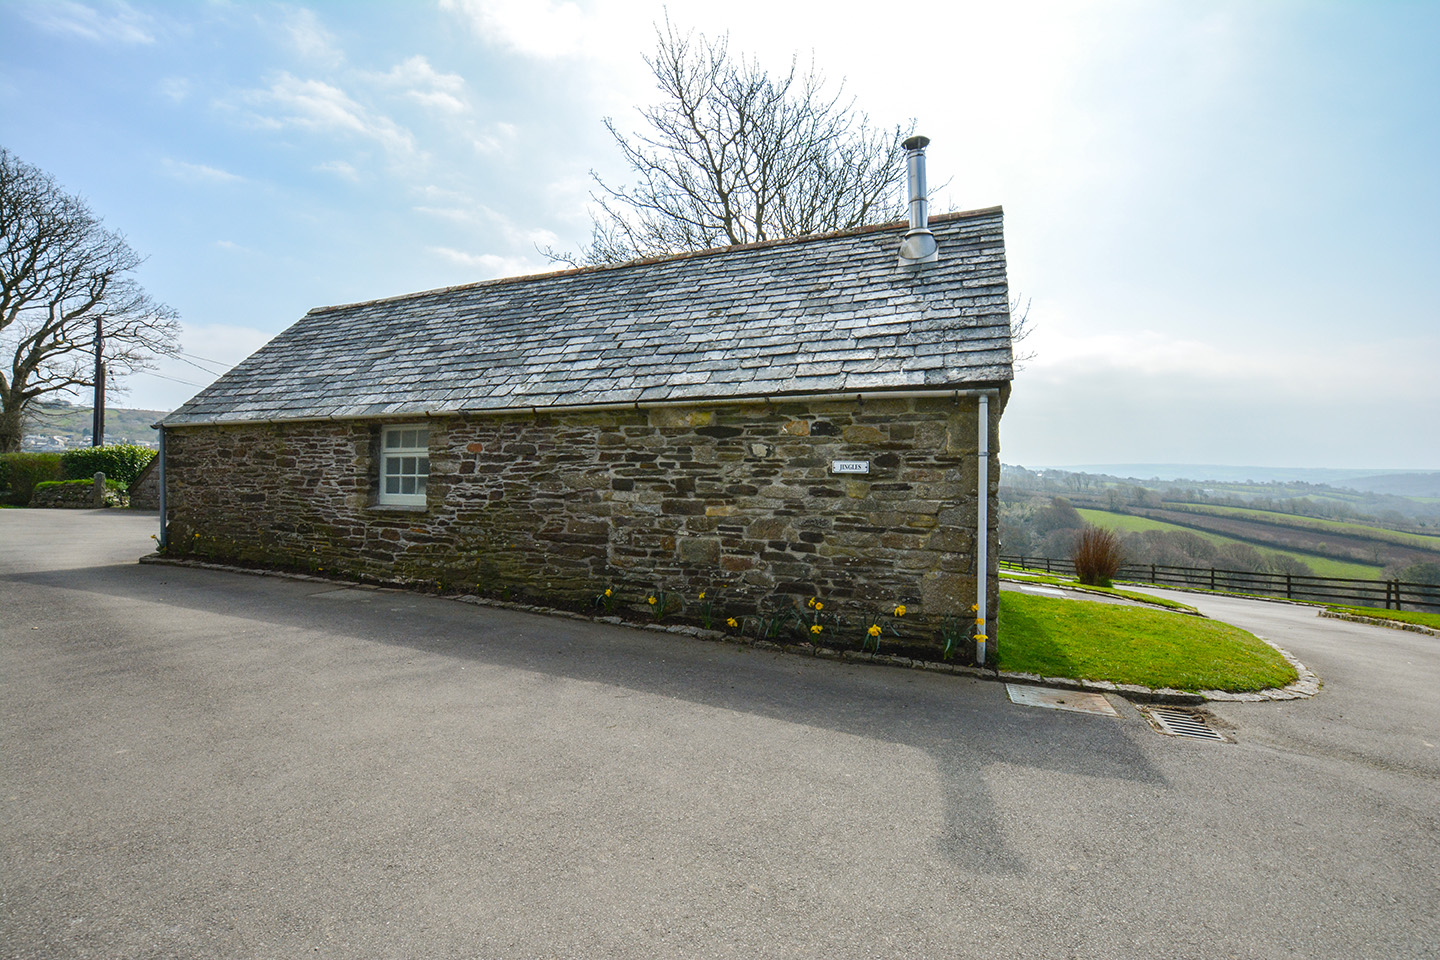 The outside of Jingles luxury self catering holiday cottage at Penrose Burden in North Cornwall near Bodmin Moor01.jpg